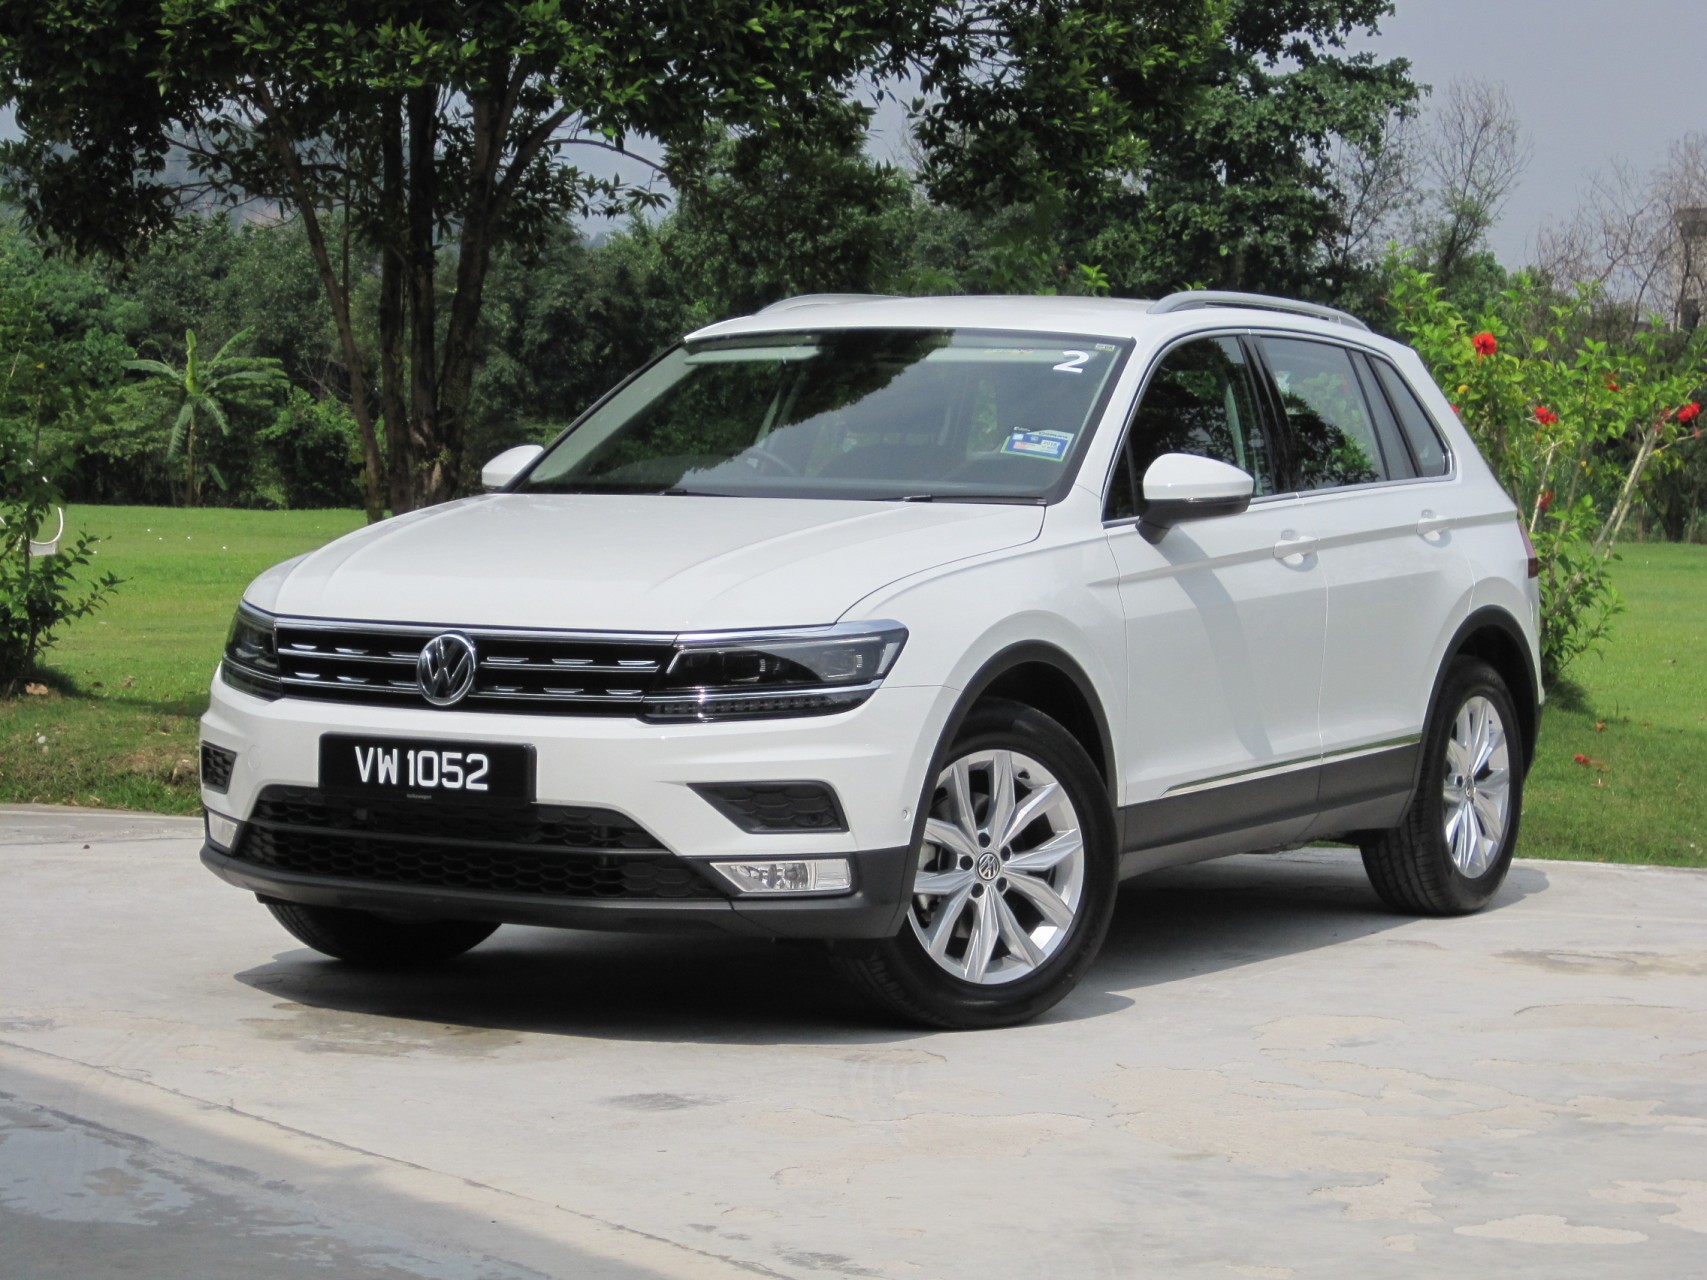 FRIDAY FEATURE The VW Tiguan 1.4 TSI Why It Should Be